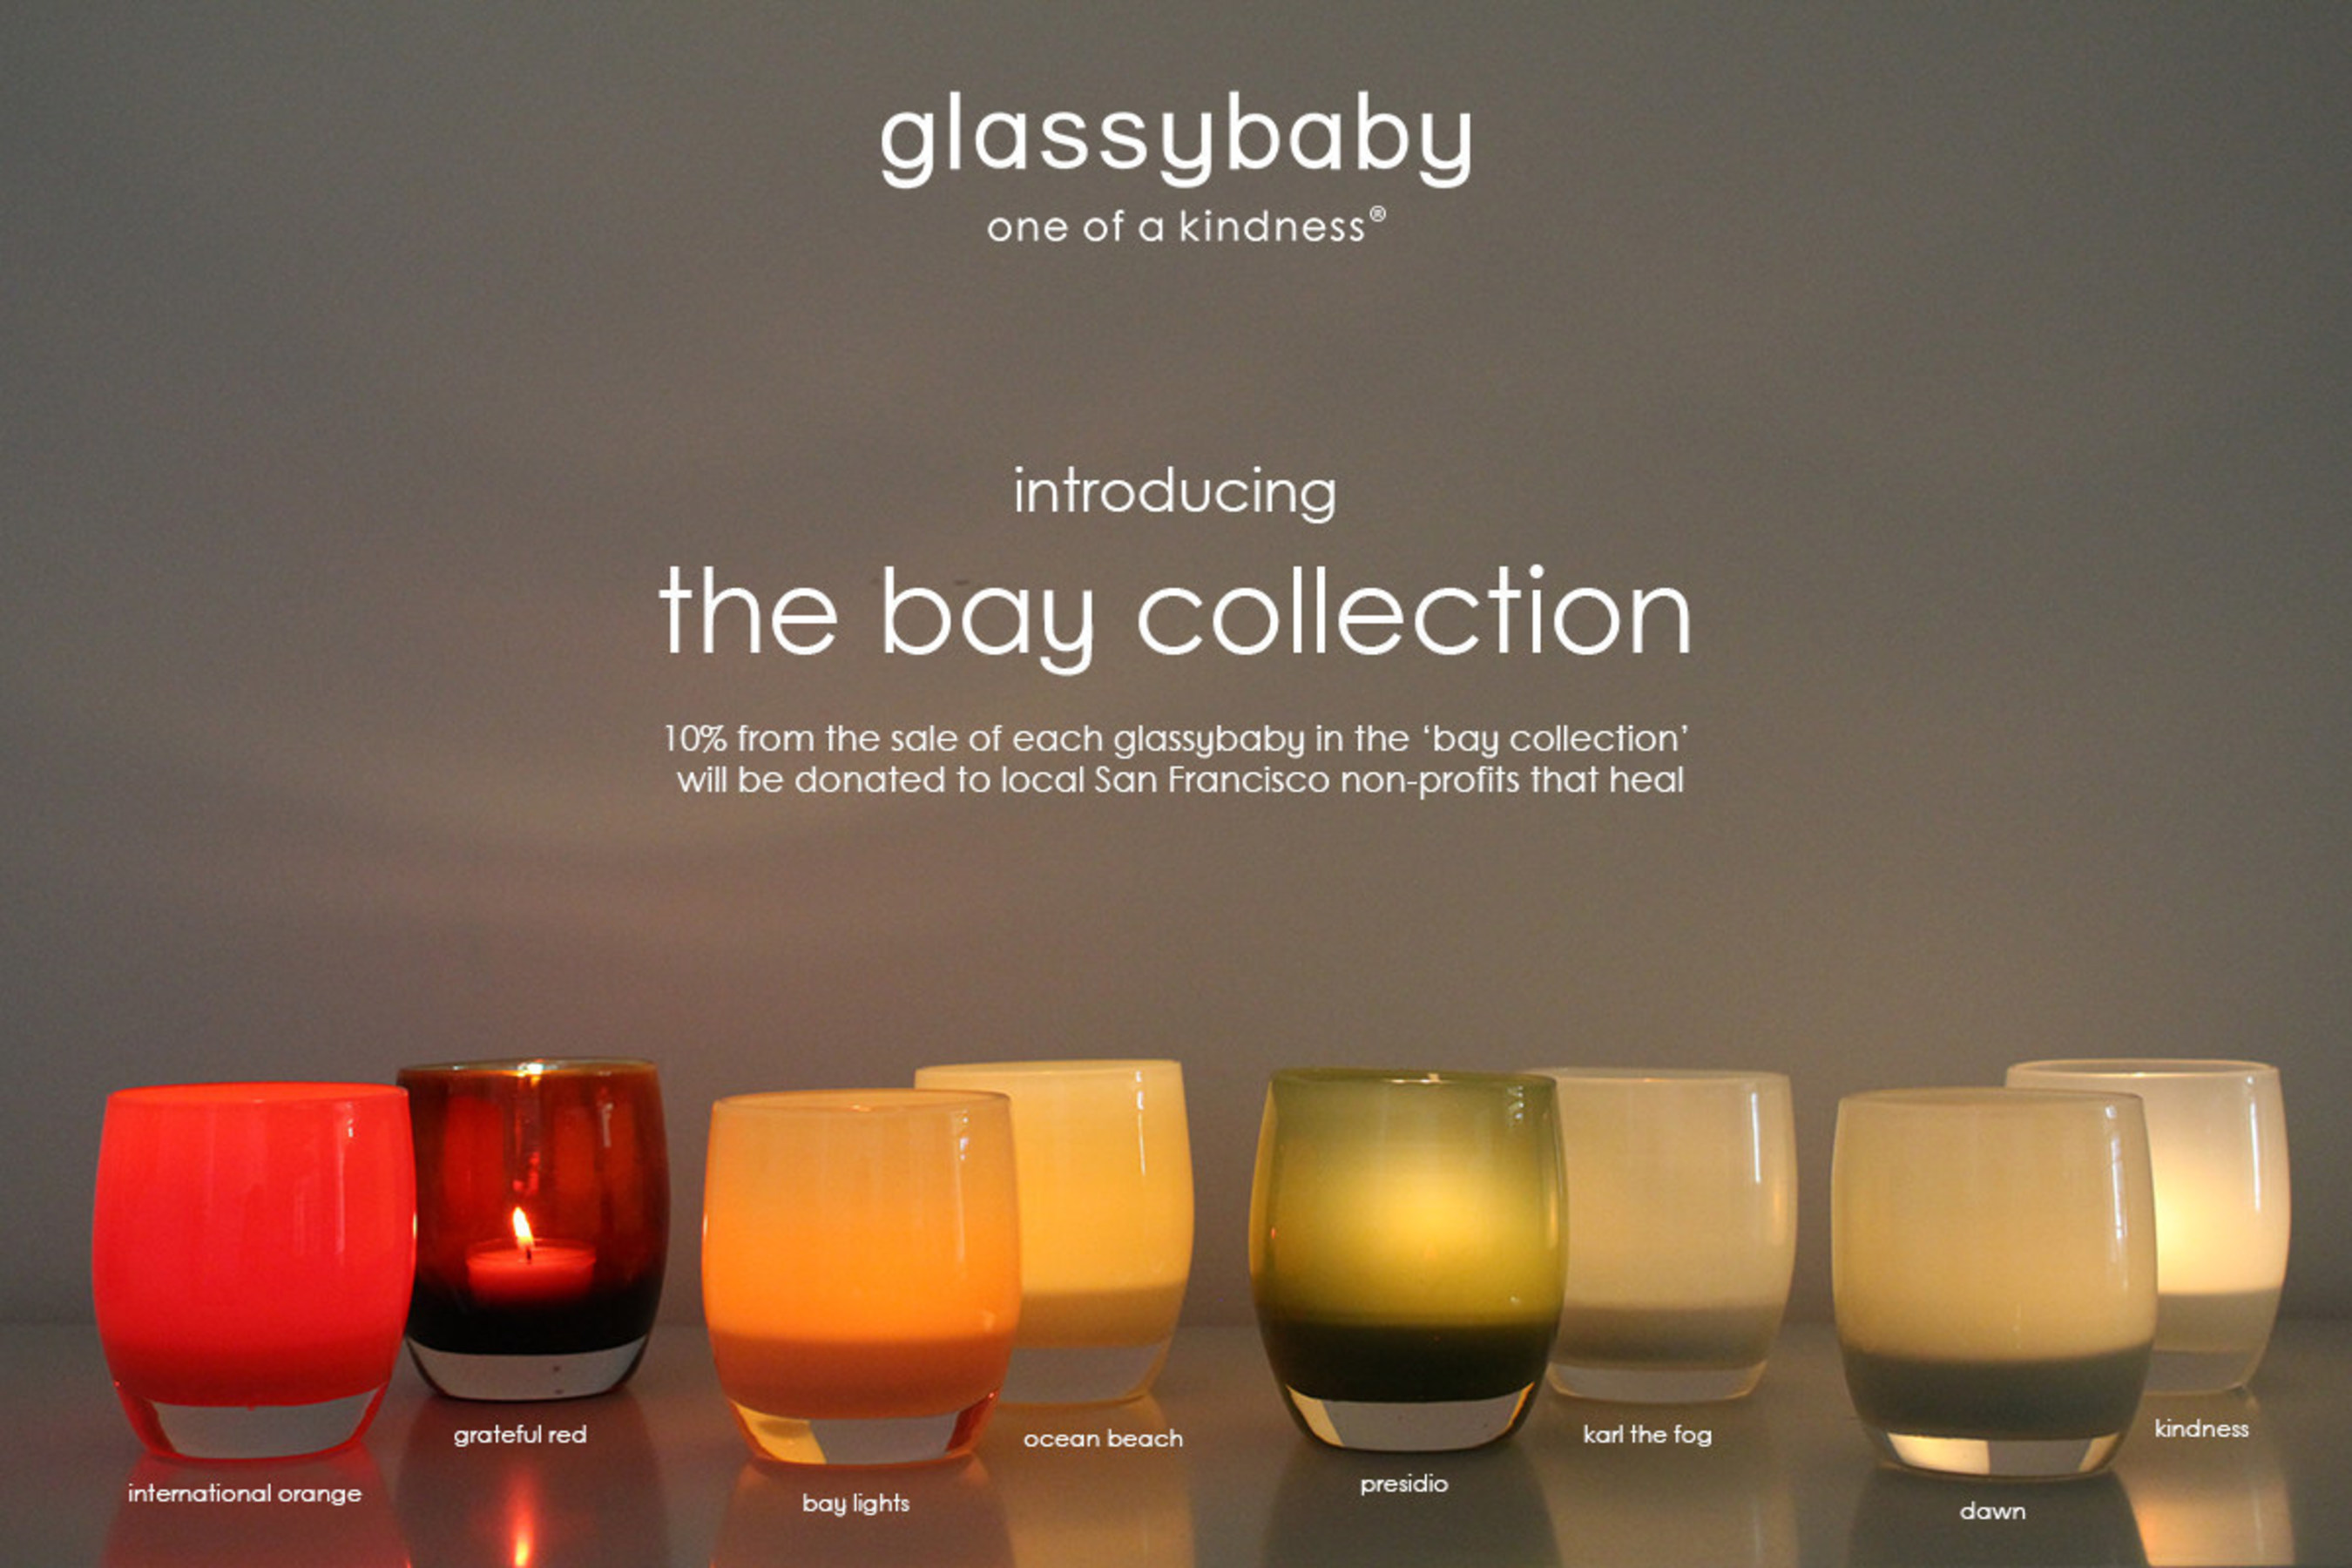 The bay collection is available exclusively at the glassybaby store in San Francisco, 3665 Sacramento Street. grateful red and dawn votives also available at glassybaby.com